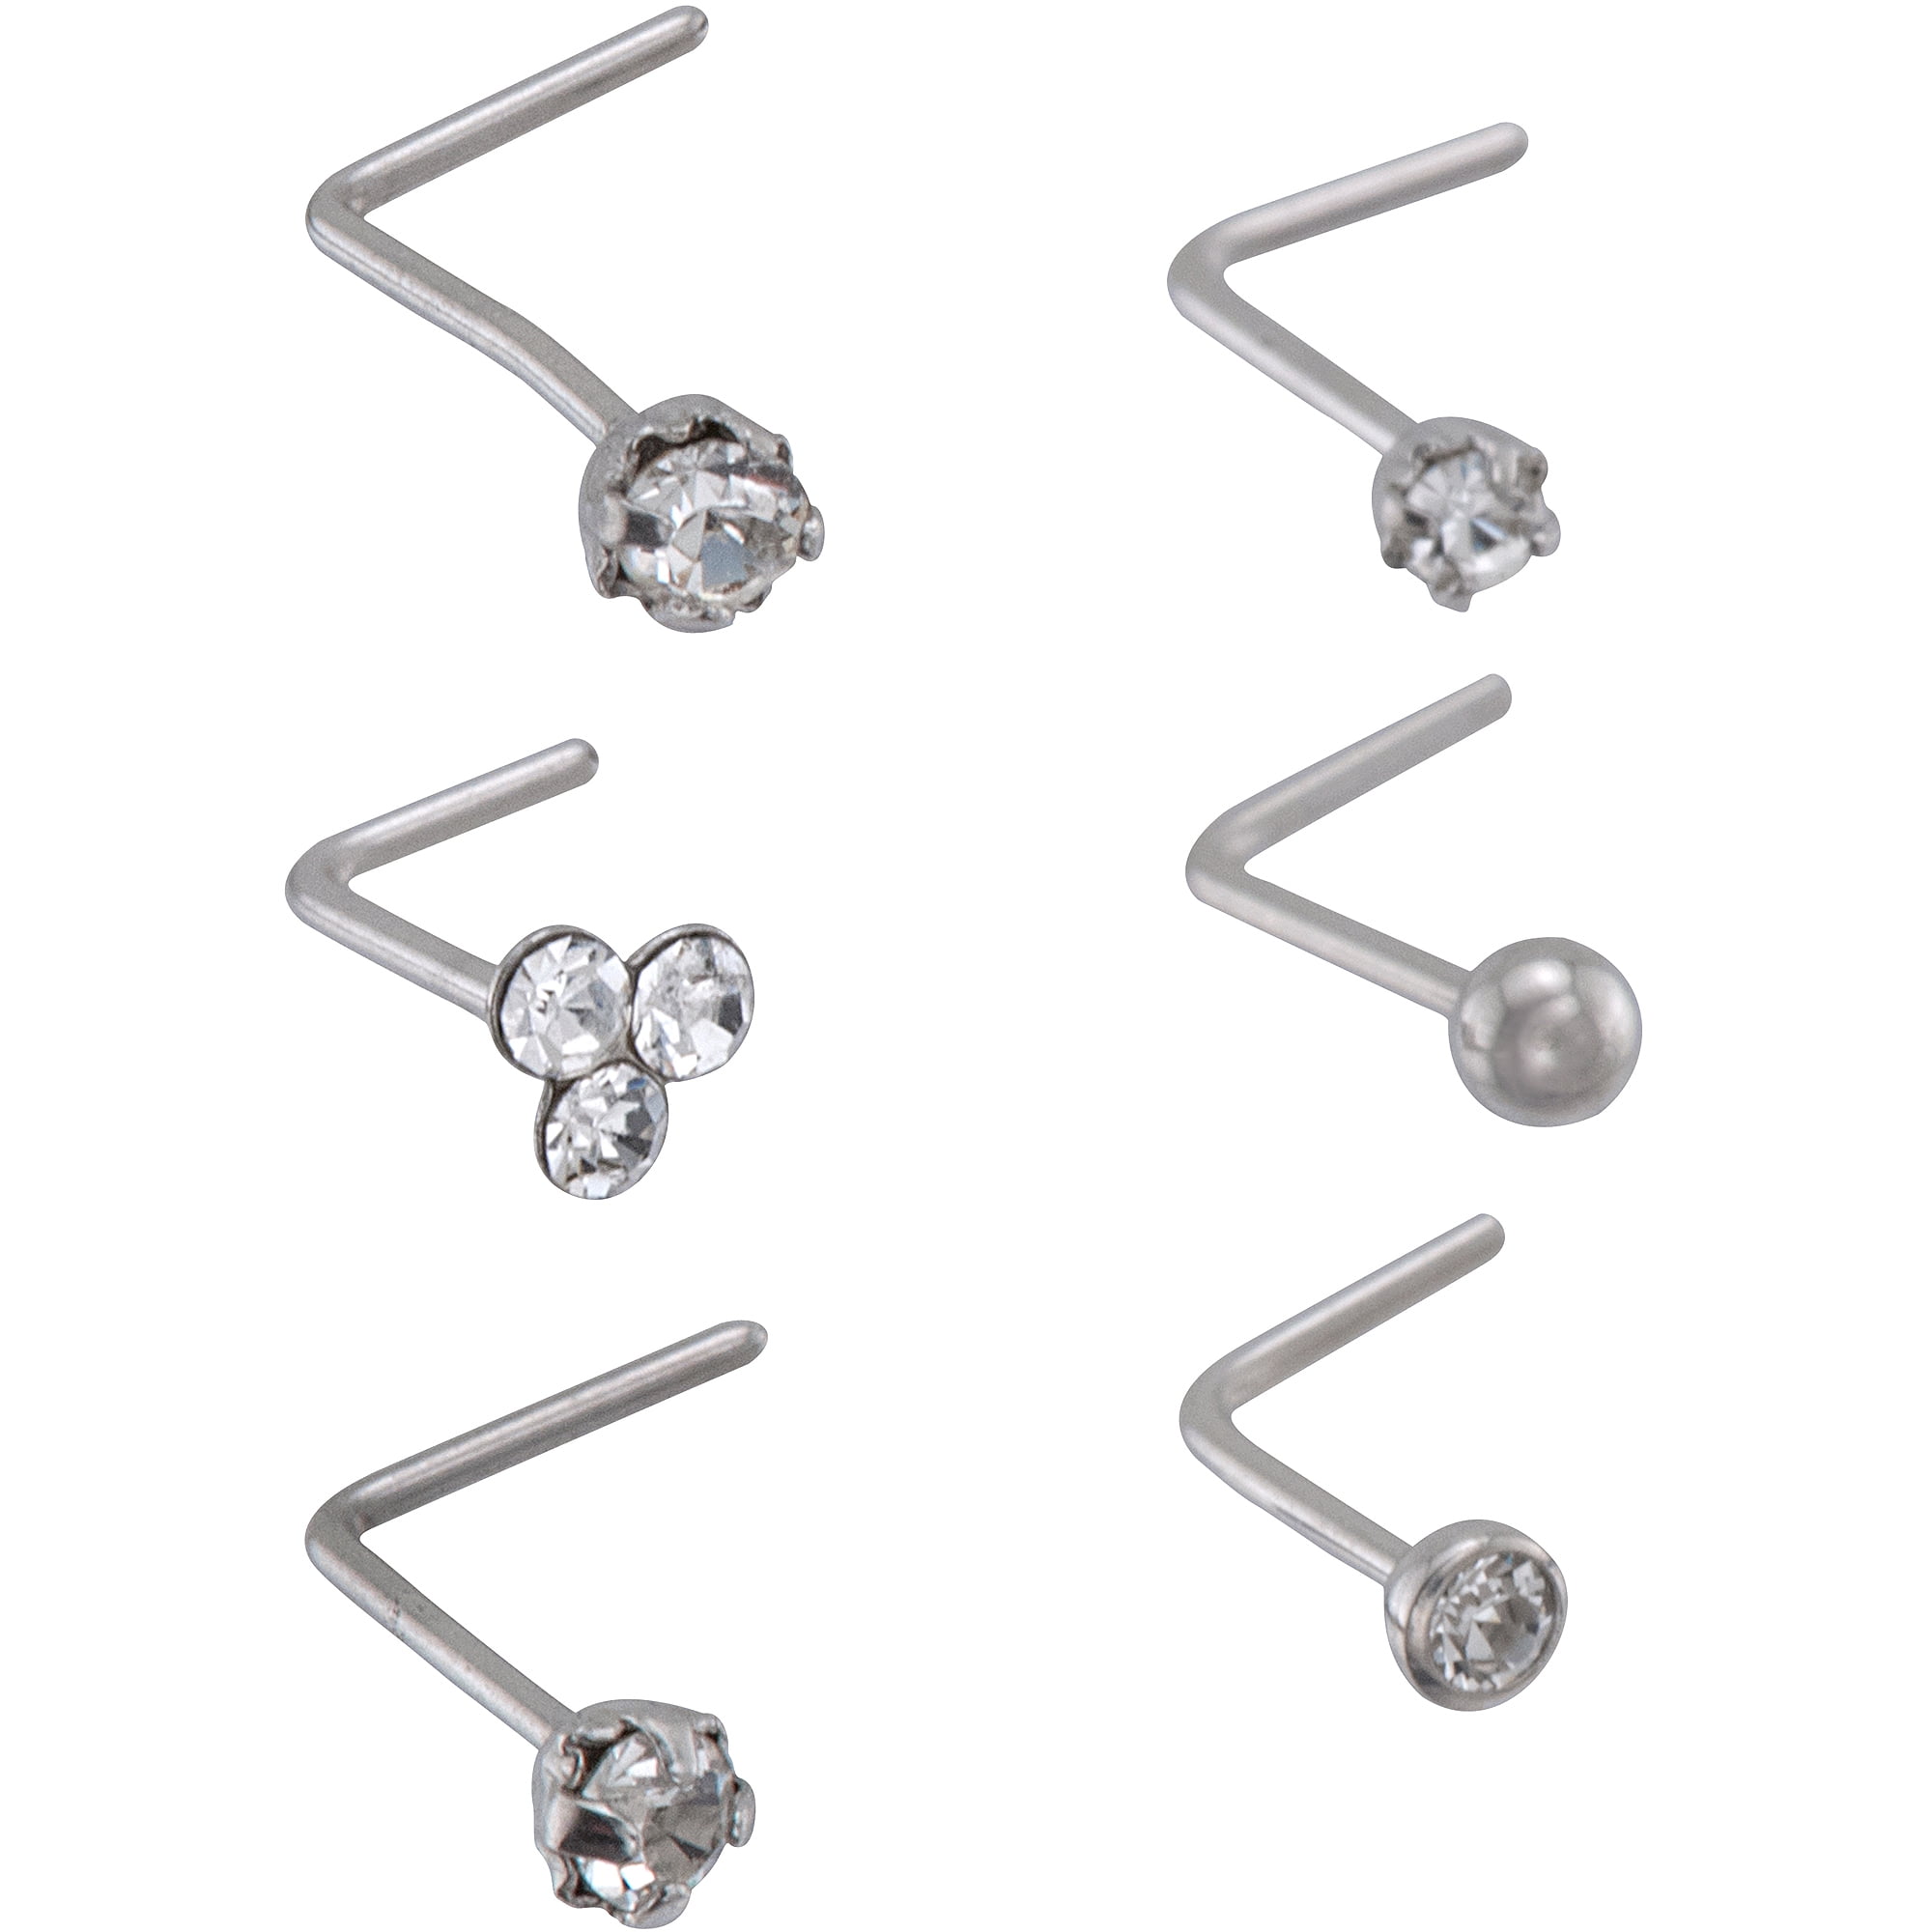 L Shaped Nose Stud Value Pack Clear Walmart and Nose Piercing Accessories